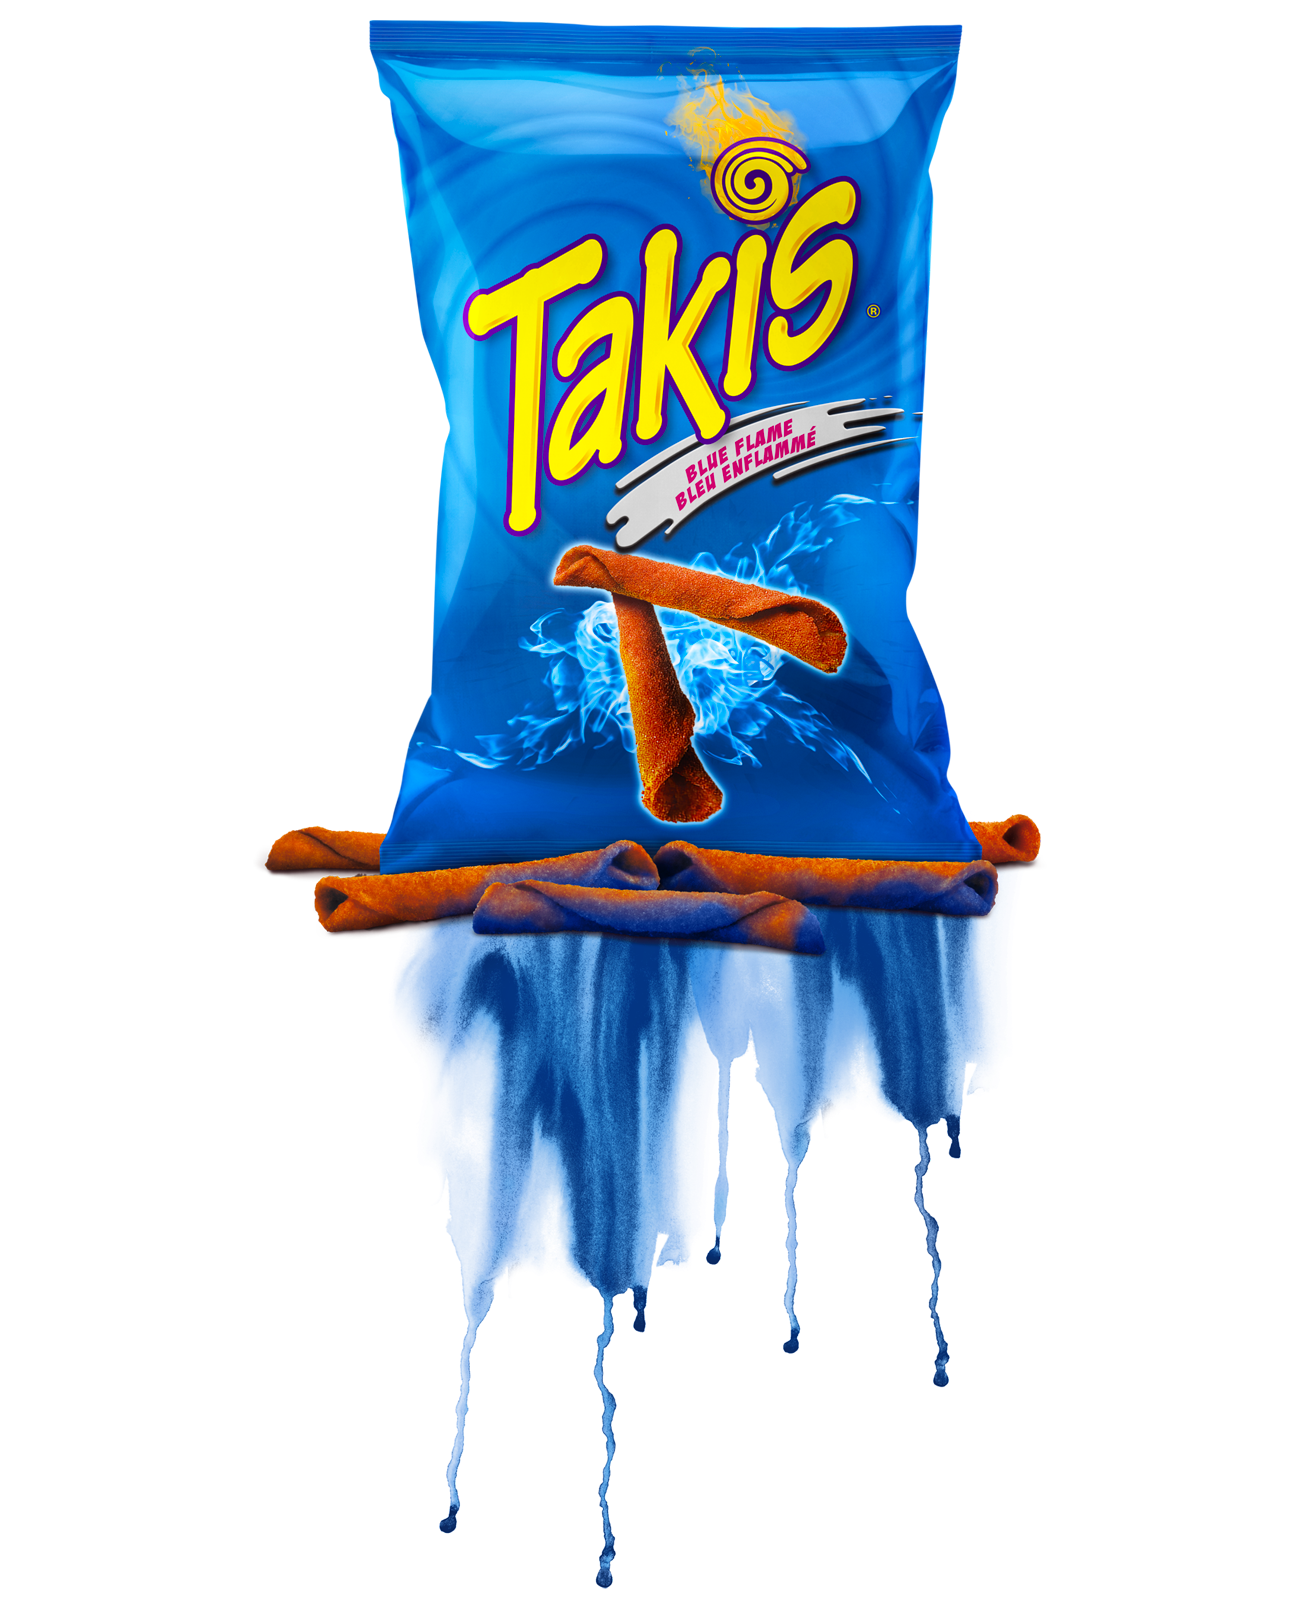 HOLY SHIT THESE ARE NASTY. i thought hey were normal takis cuz they were in...